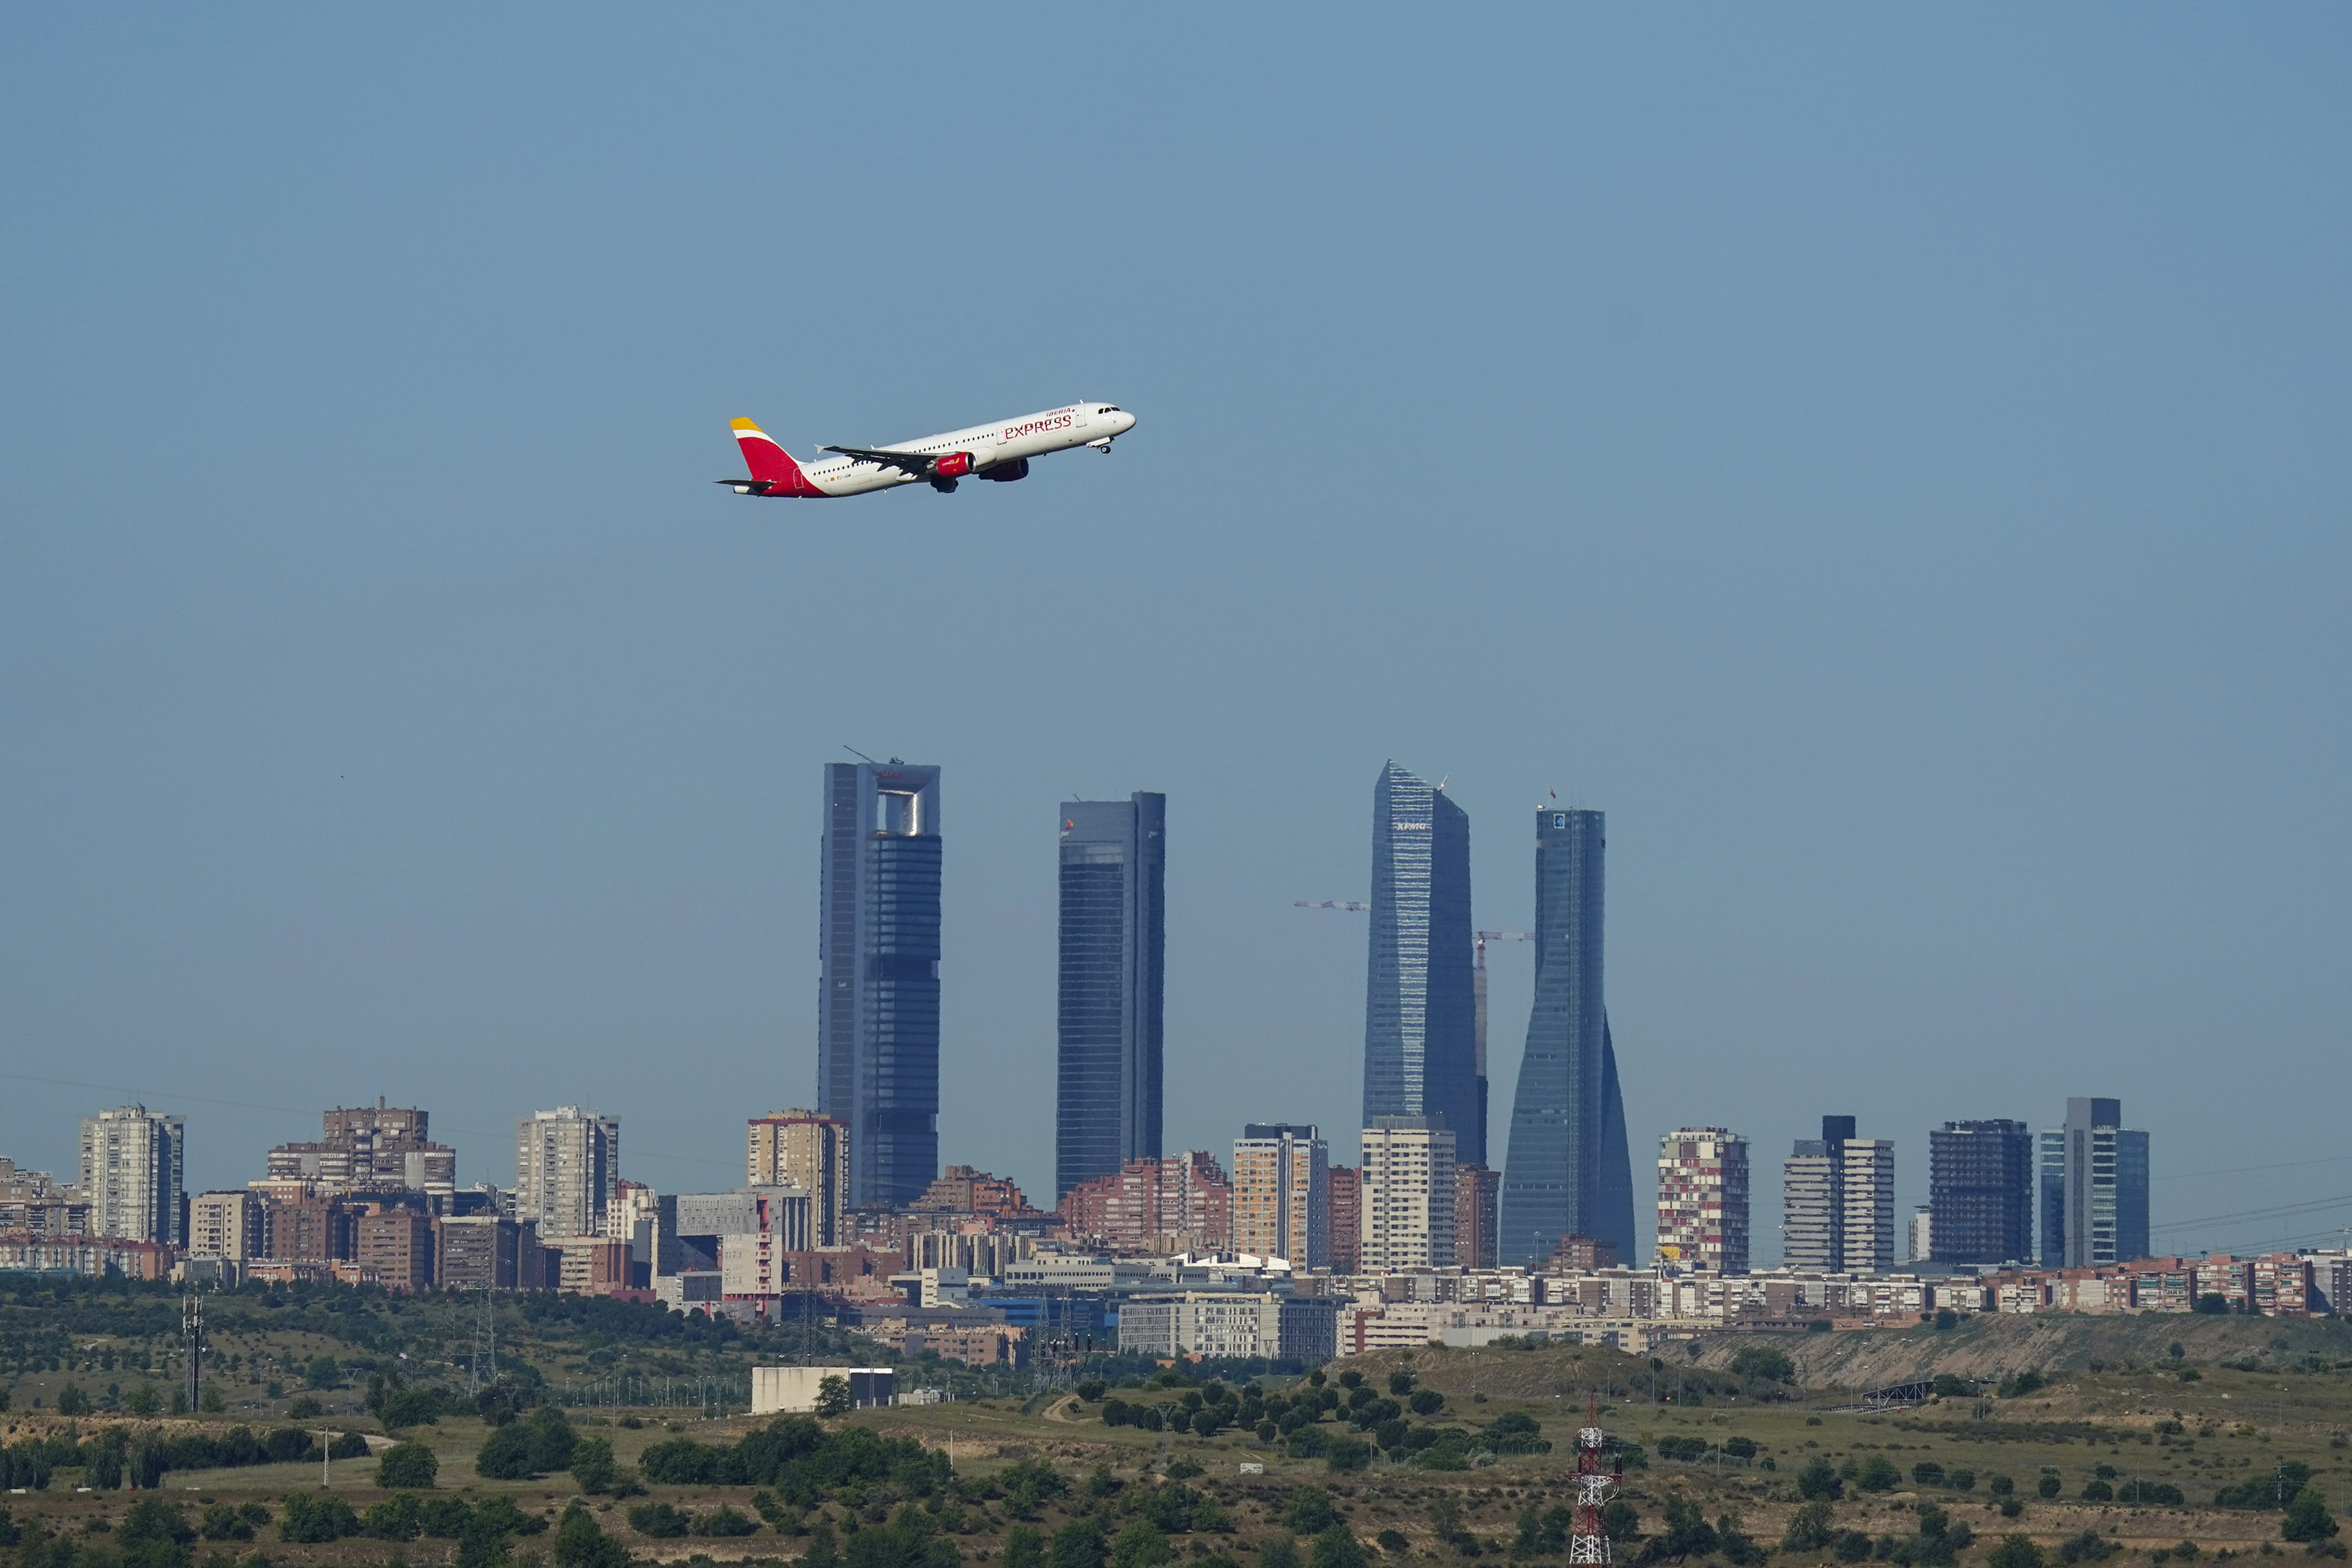 A passenger aircraft&nbsp;takes off from Madrid Barajas airport in Madrid.